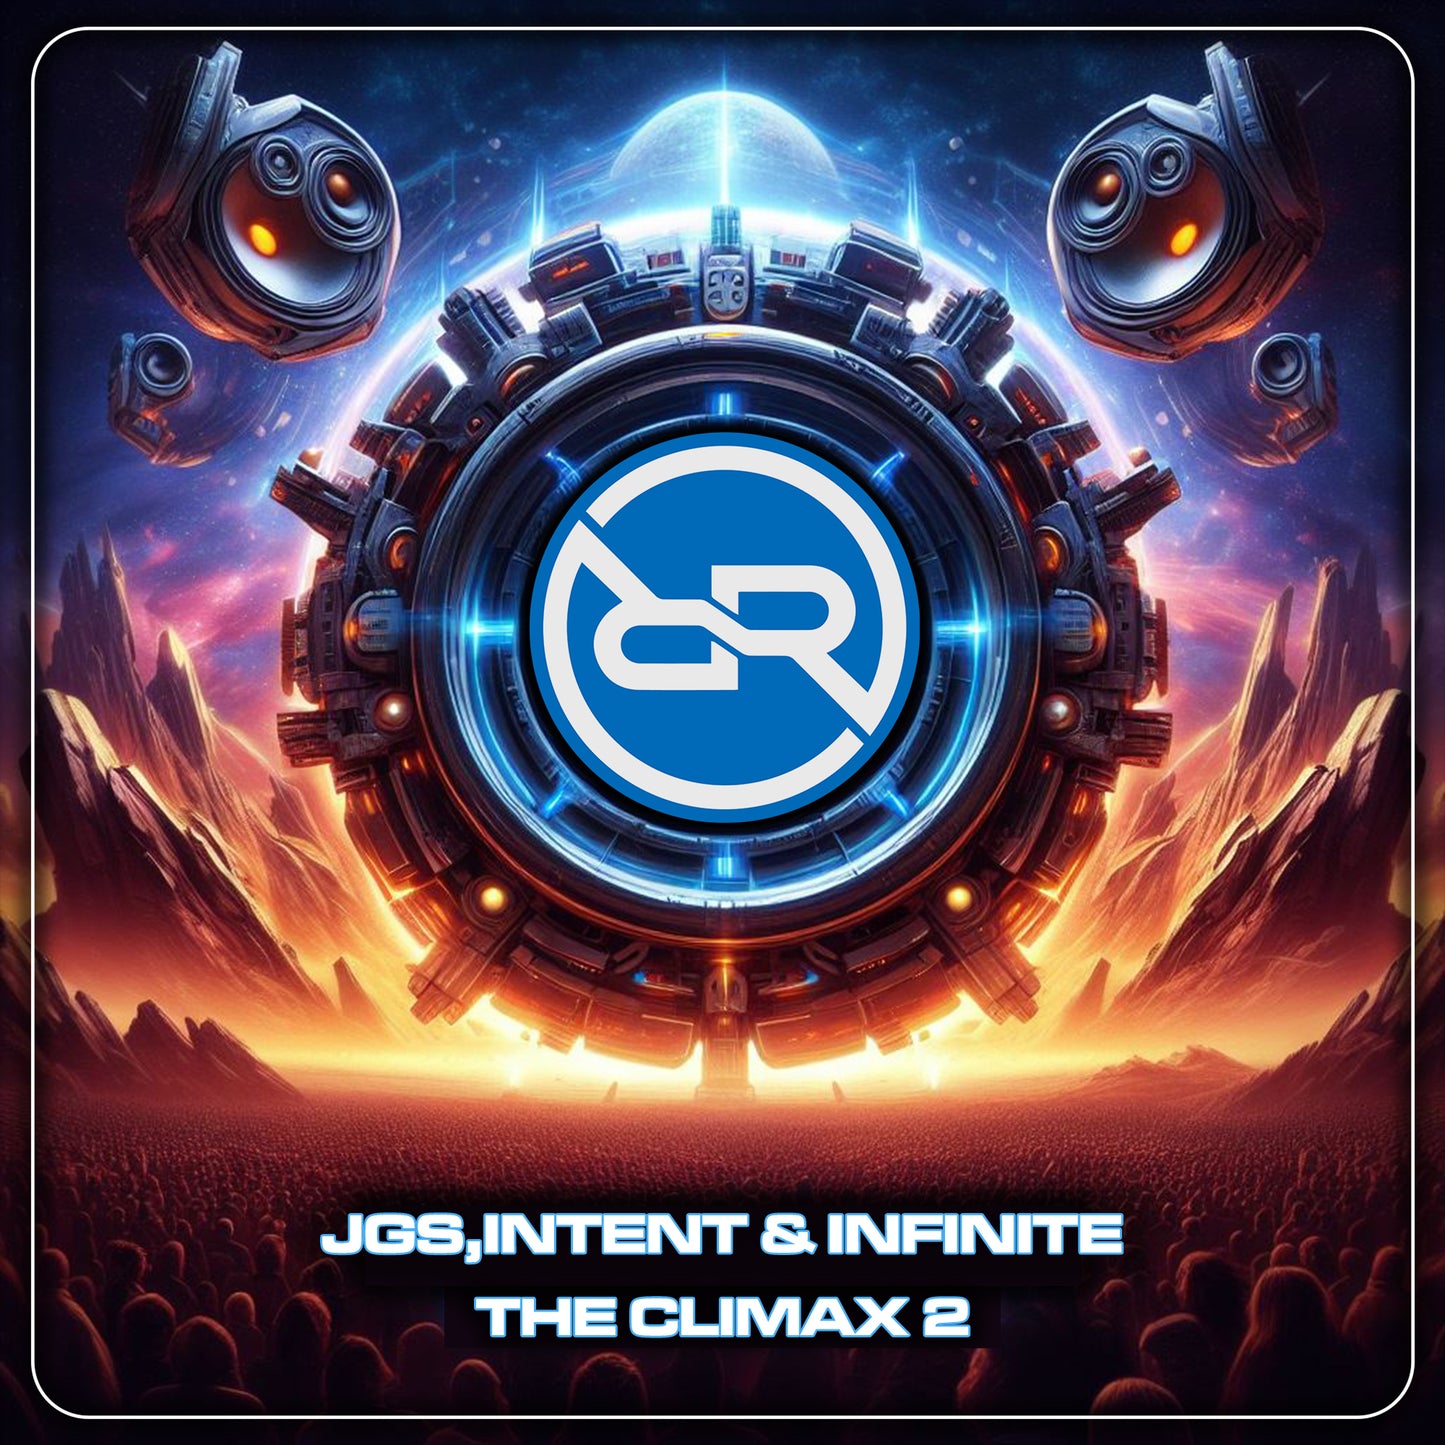 JGS, INTENT & INFINITE - The ClimaX 2